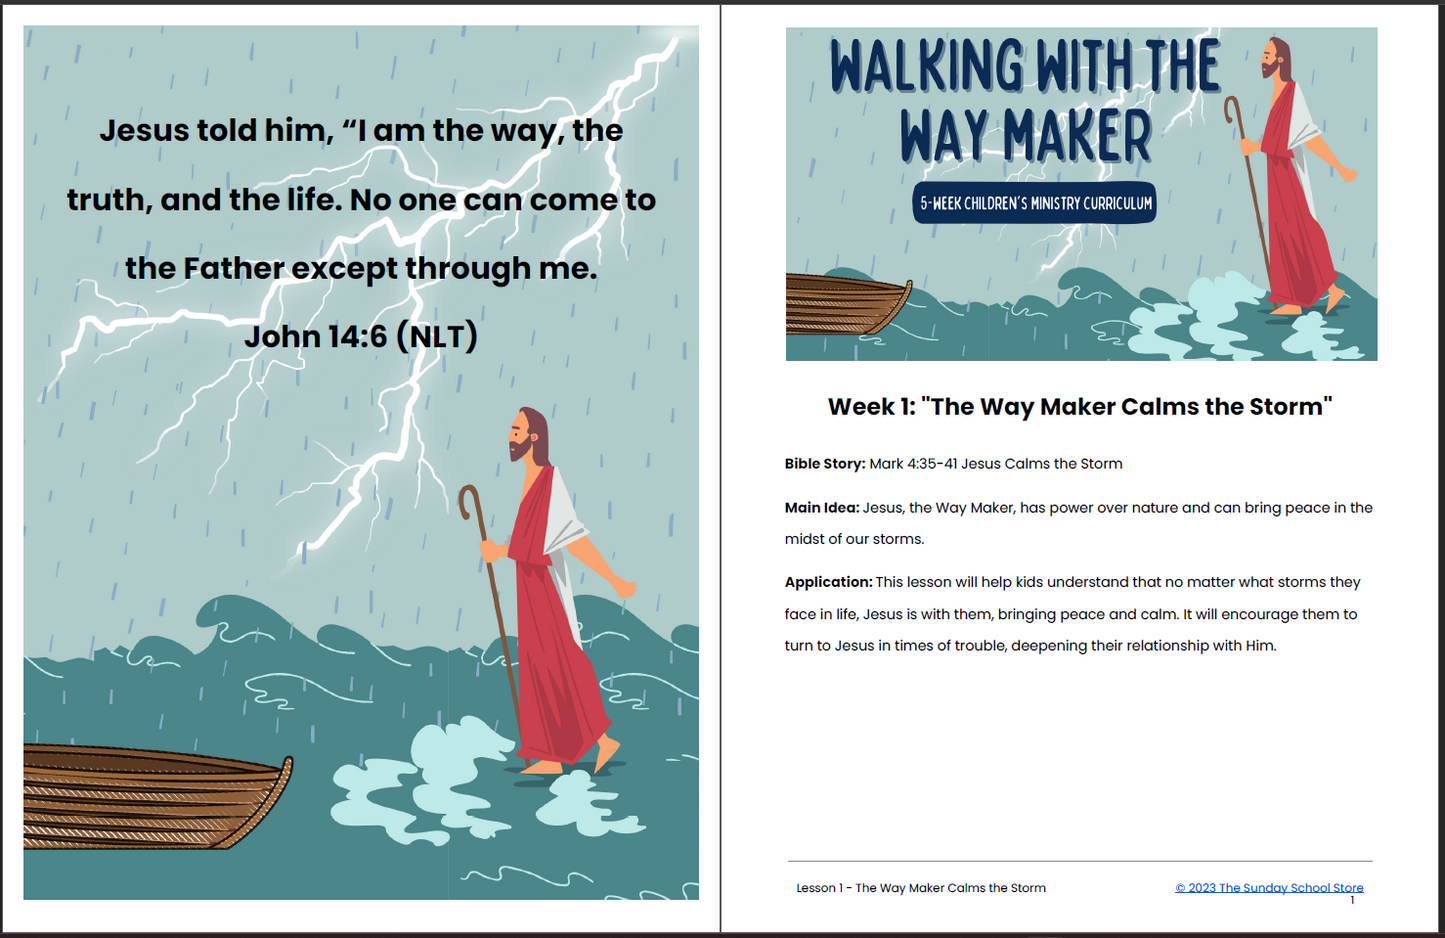 Walking with the Way Maker: A New Journey Begins in Children's Ministry -  Ministry-To-Children Sunday School Curriculum